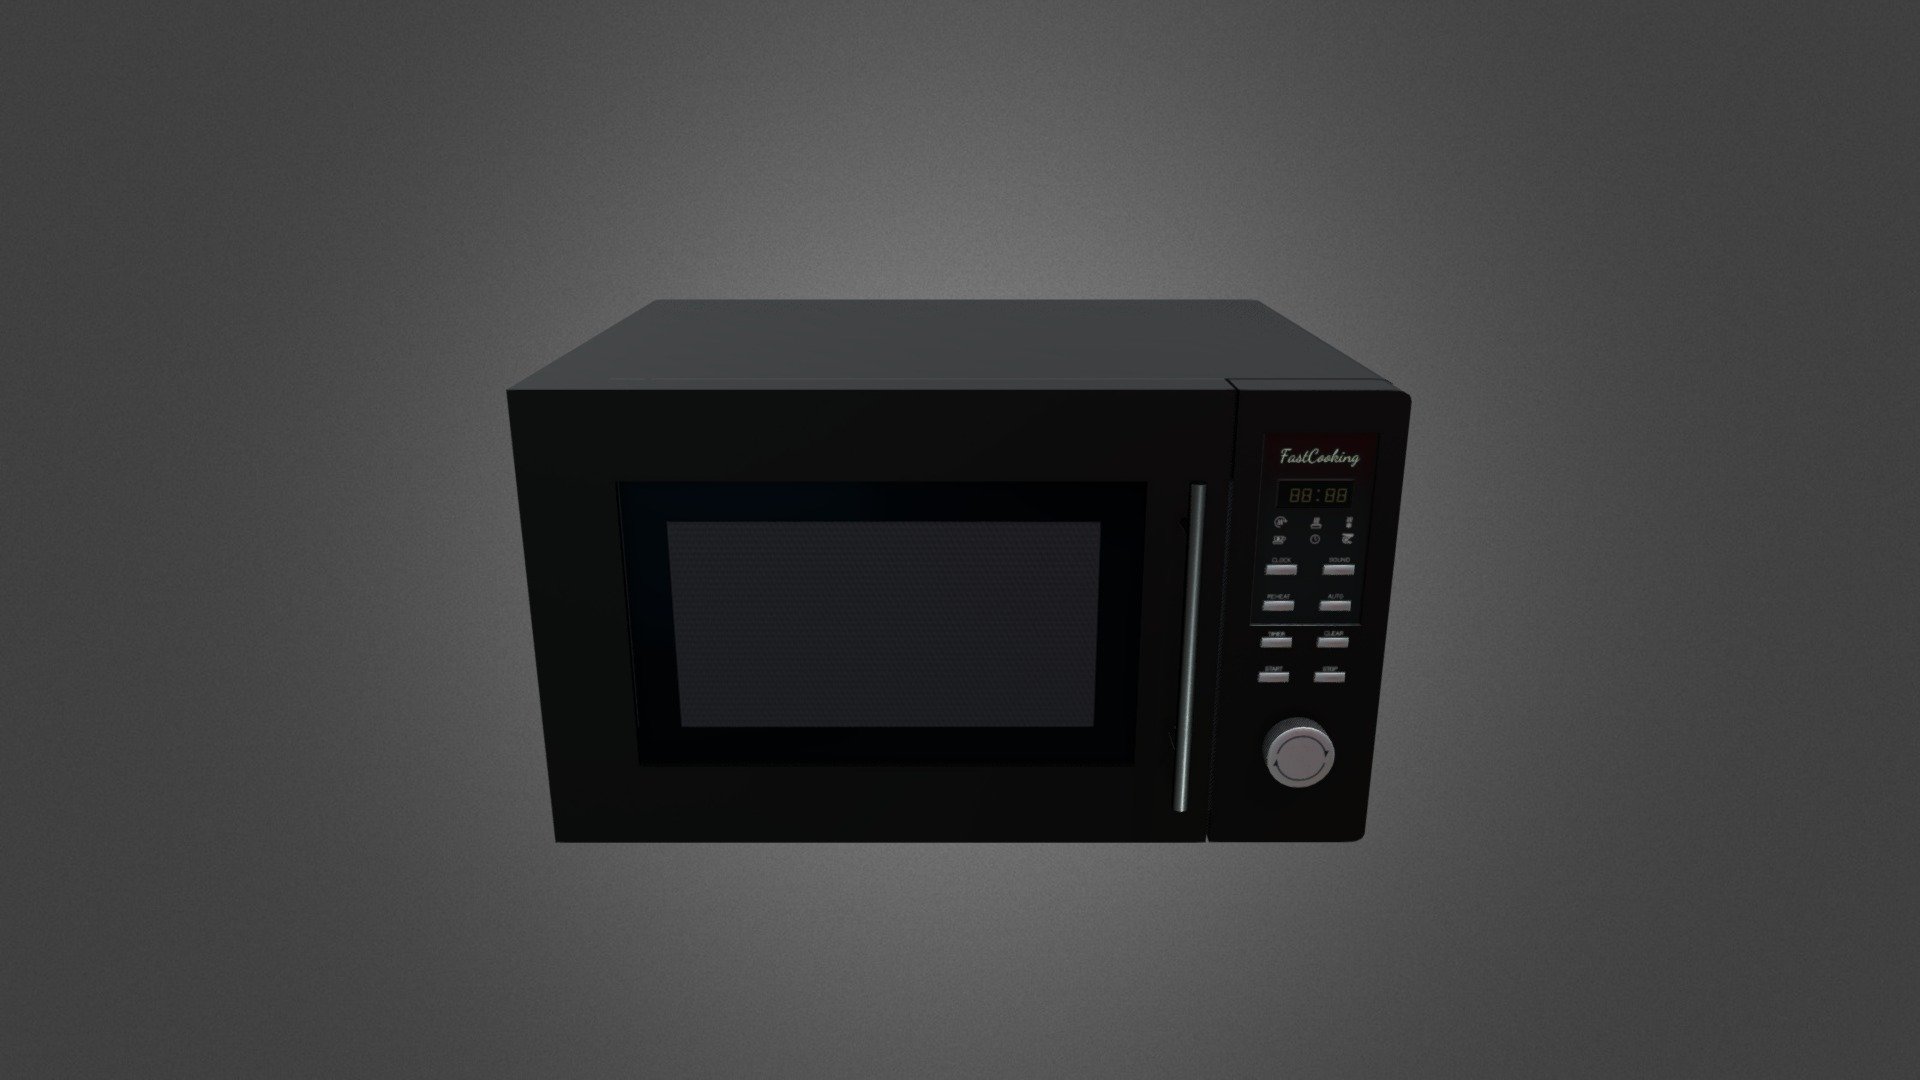 Microwave with very low poly count suitable for Video Games and Real-Time renders with PBR Material and all textures are 2048x2048.
The model is photo realistic and full detailed will help you to add realism to your projects with the best performance at the same time.
The inside is detailed as well with glass windows so you can light the inside or put on/off option and do whatever suits your scene
Overview:
-Full PBR Texture Maps (Basecolor,Roughness,Metallicness, Ambient occlusion, Height, and Normal Map)
-Textures come in PNG Format with 2048x2048 size and the 4096x4096 Update is coming soon
-No Plugins Required,
-All objects and textures are well organized and named.
-Fully unwrapped UVs, Non-overlapping UV-islands.
-Model is included in 3 formats (Blend, FBX, and OBJ) And more formats are coming soon
-camera and light setup is included in the blender file (Render Scene File).
-ready for subdivision
-Only 506 Faces and 662 Vertices
Part of House and Electronics Appliances Collection - Microwave GameReady - LowPoly with PBR Material - Buy Royalty Free 3D model by Abdelrahman Ahmed (@AbdelrahmanAhmed) 3d model